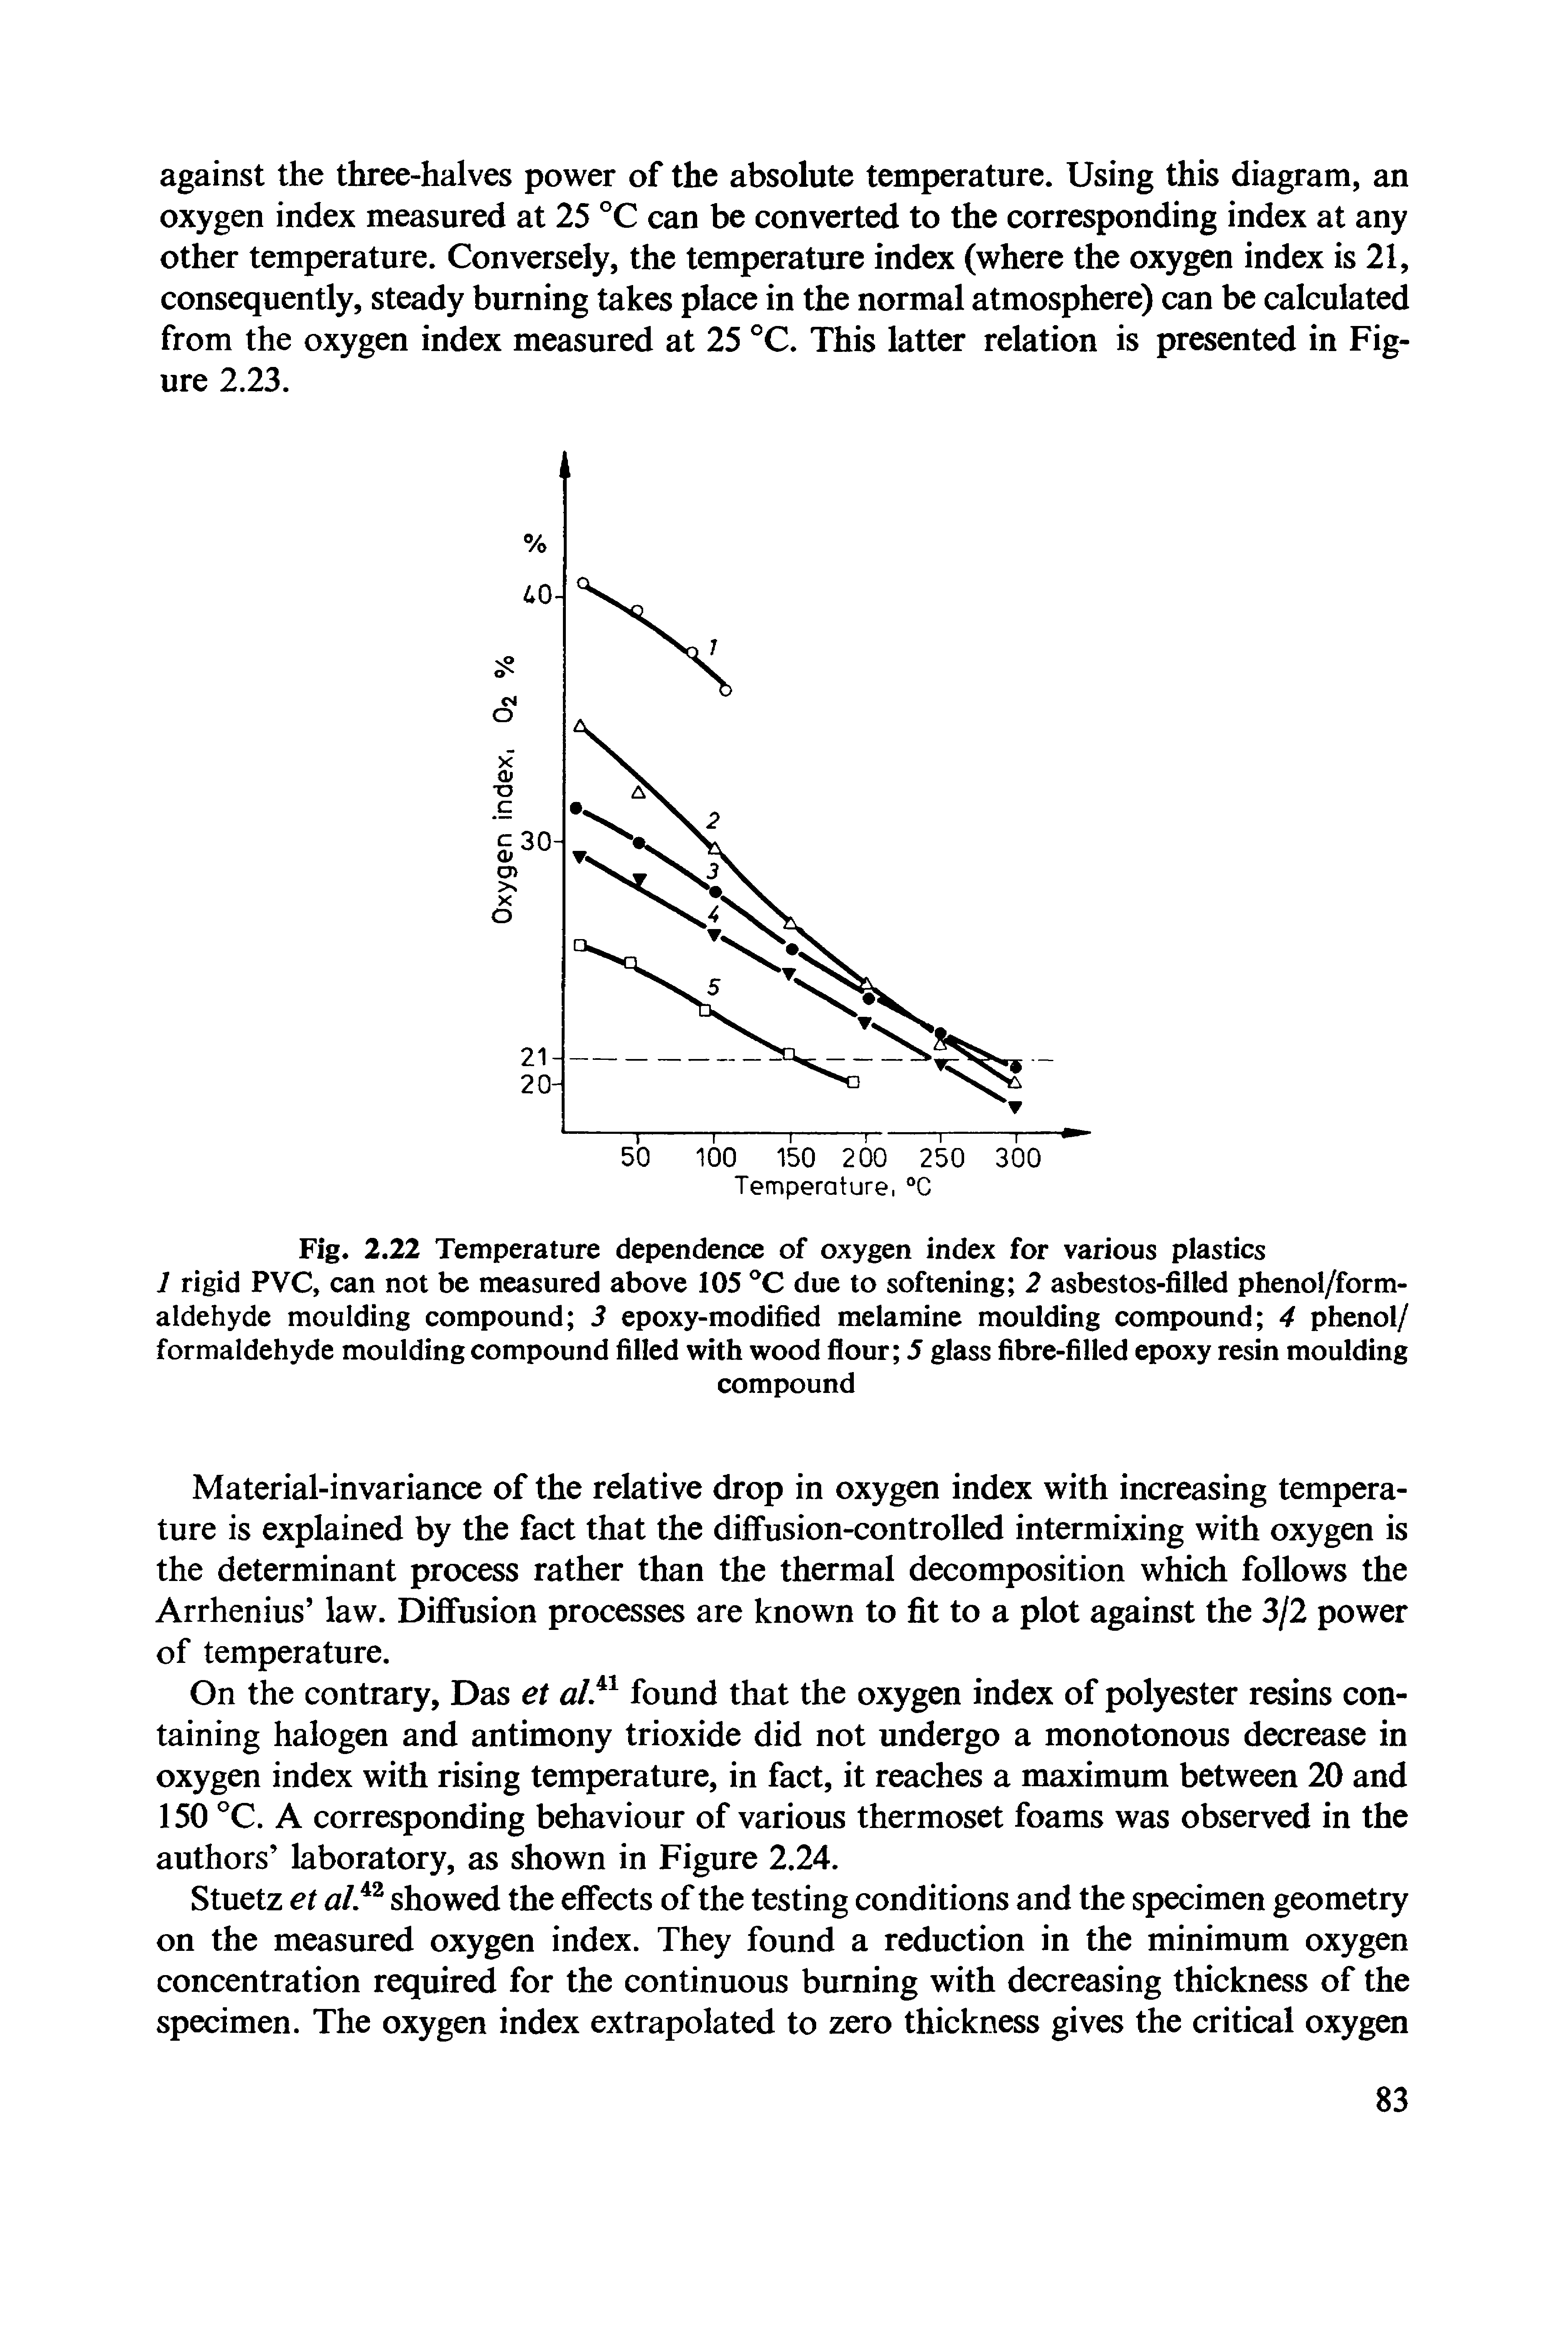 Fig. 2.22 Temperature dependence of oxygen index for various plastics 1 rigid PVC, can not be measured above 105 due to softening 2 asbestos-filled phenol/form-aldehyde moulding compound 3 epoxy-modified melamine moulding compound 4 phenol/ formaldehyde moulding compound filled with wood flour 5 glass fibre-filled epoxy resin moulding...